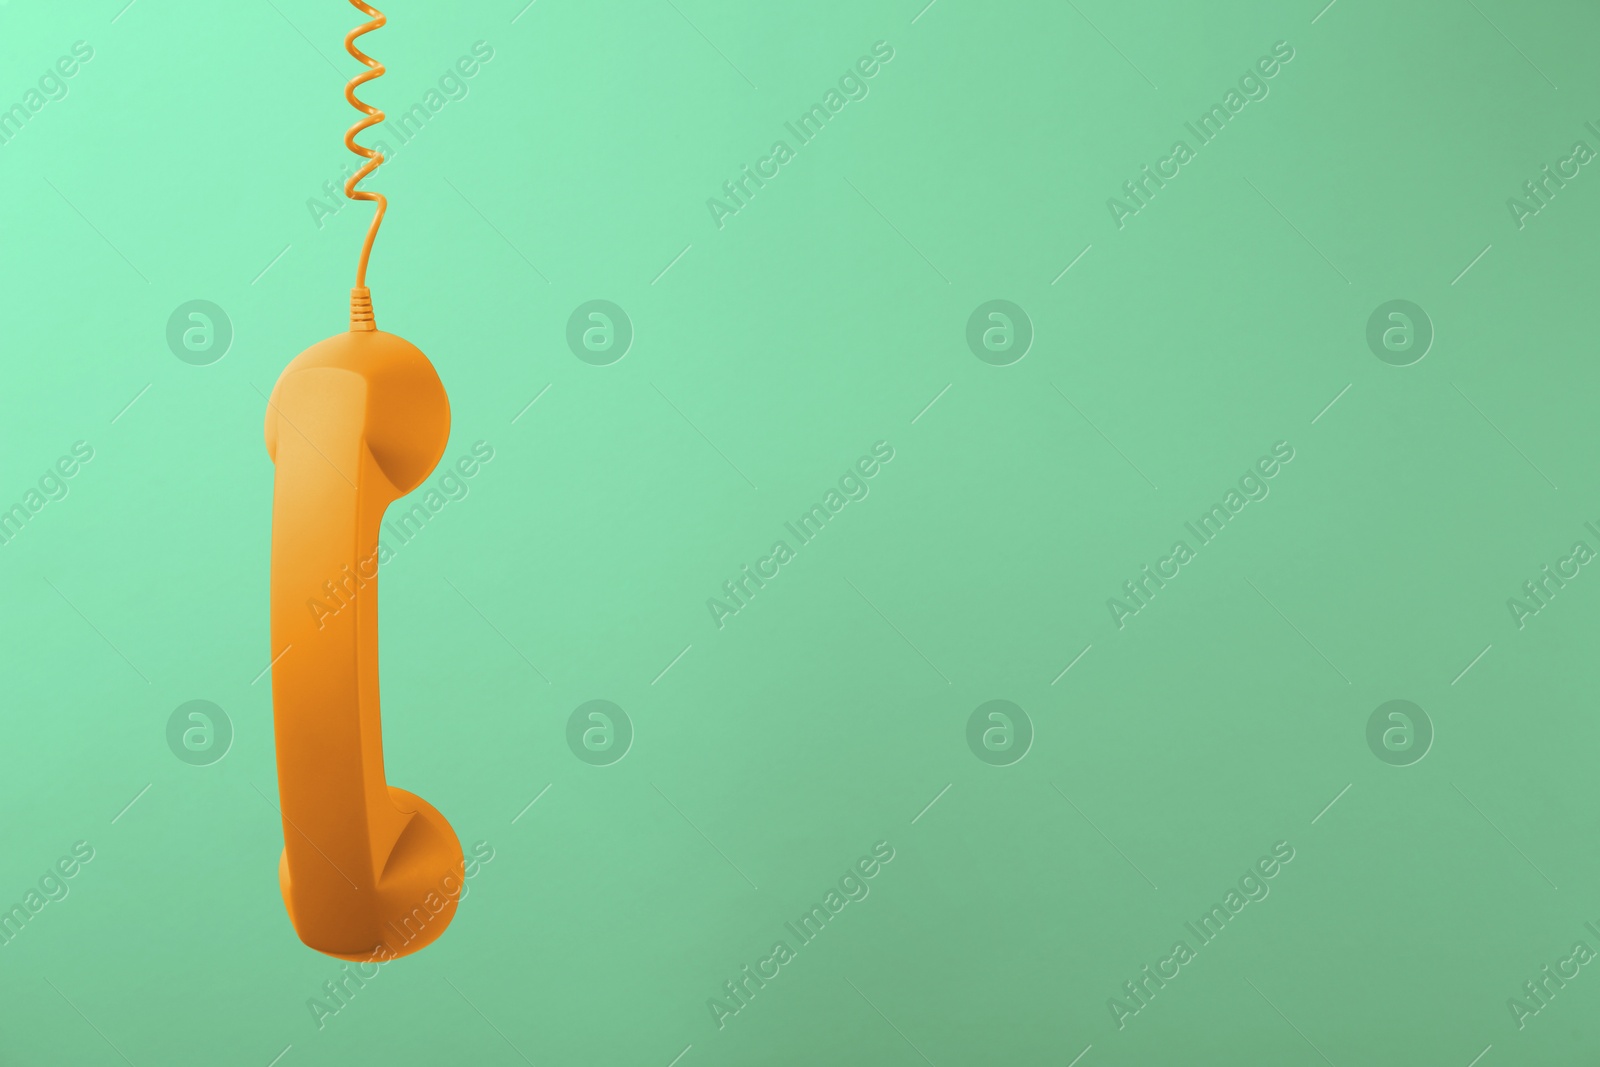 Image of Orange telephone handset hanging on light green background. Space for text